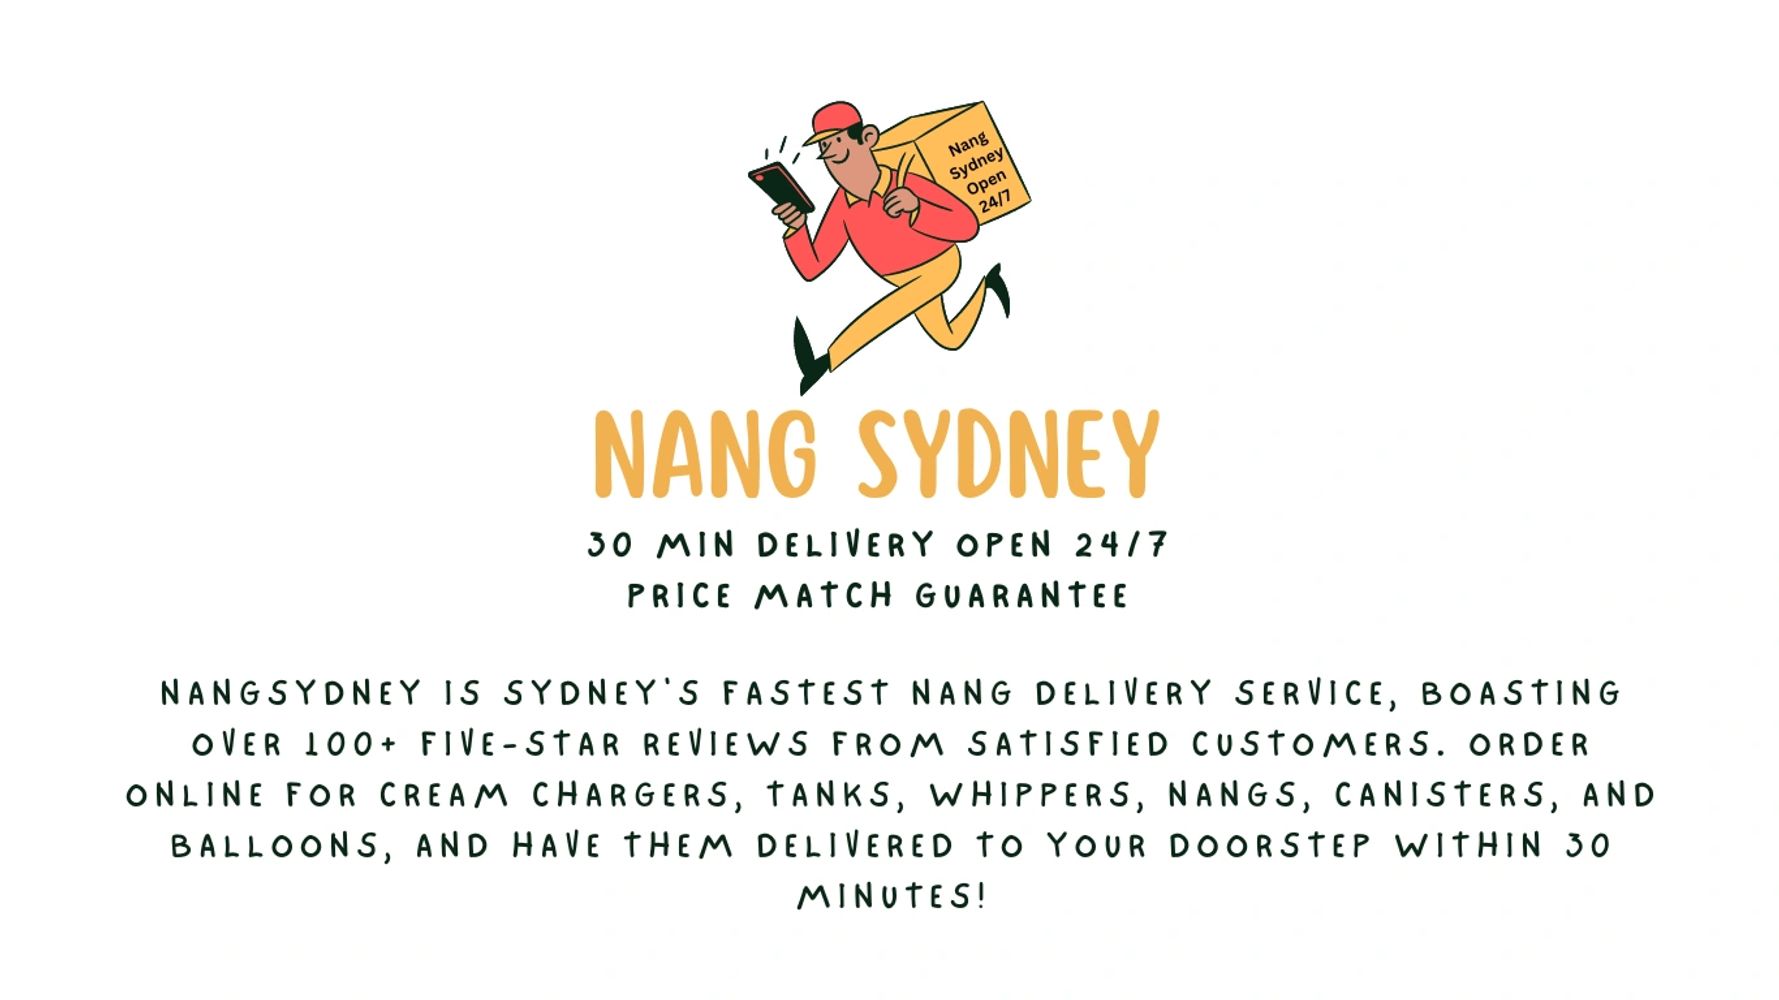 Most trusted Nangs Delivery provider in Sydney. Get whippers, cream chargers, tanks delivery.